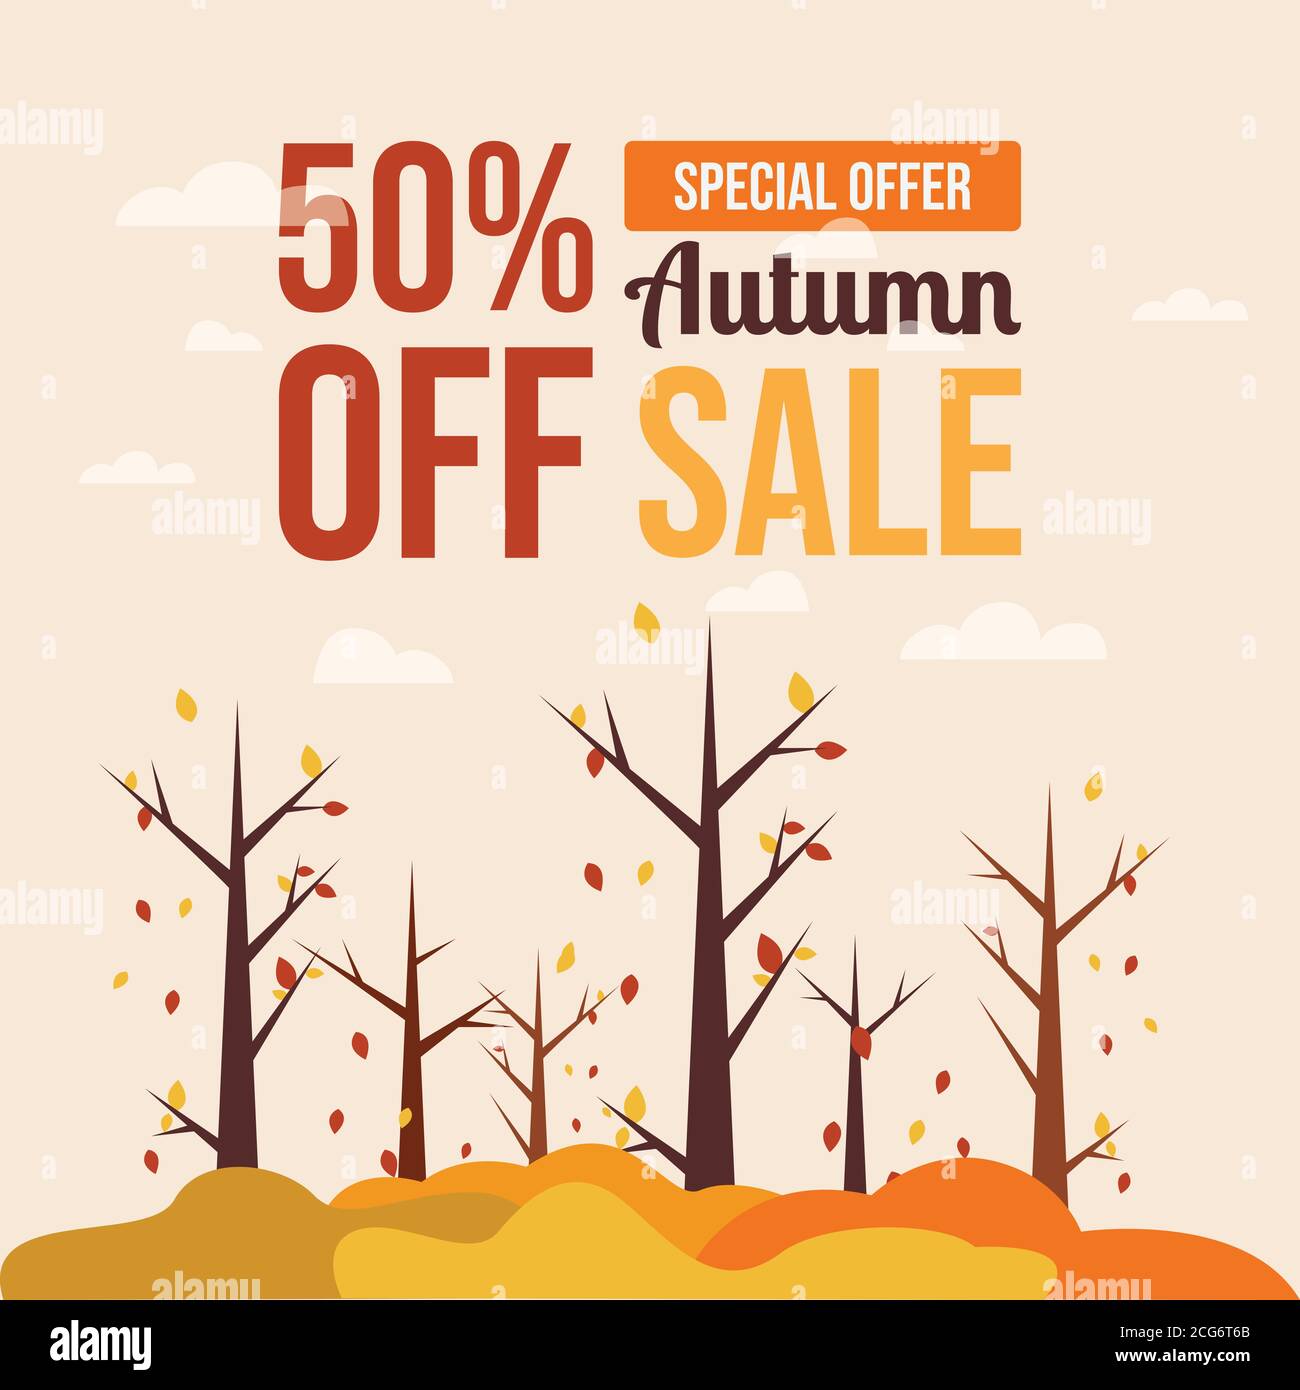 Autumn sale text banners for shopping promo. web banner template. Web banner template for autumn sale vector image Stock Vector